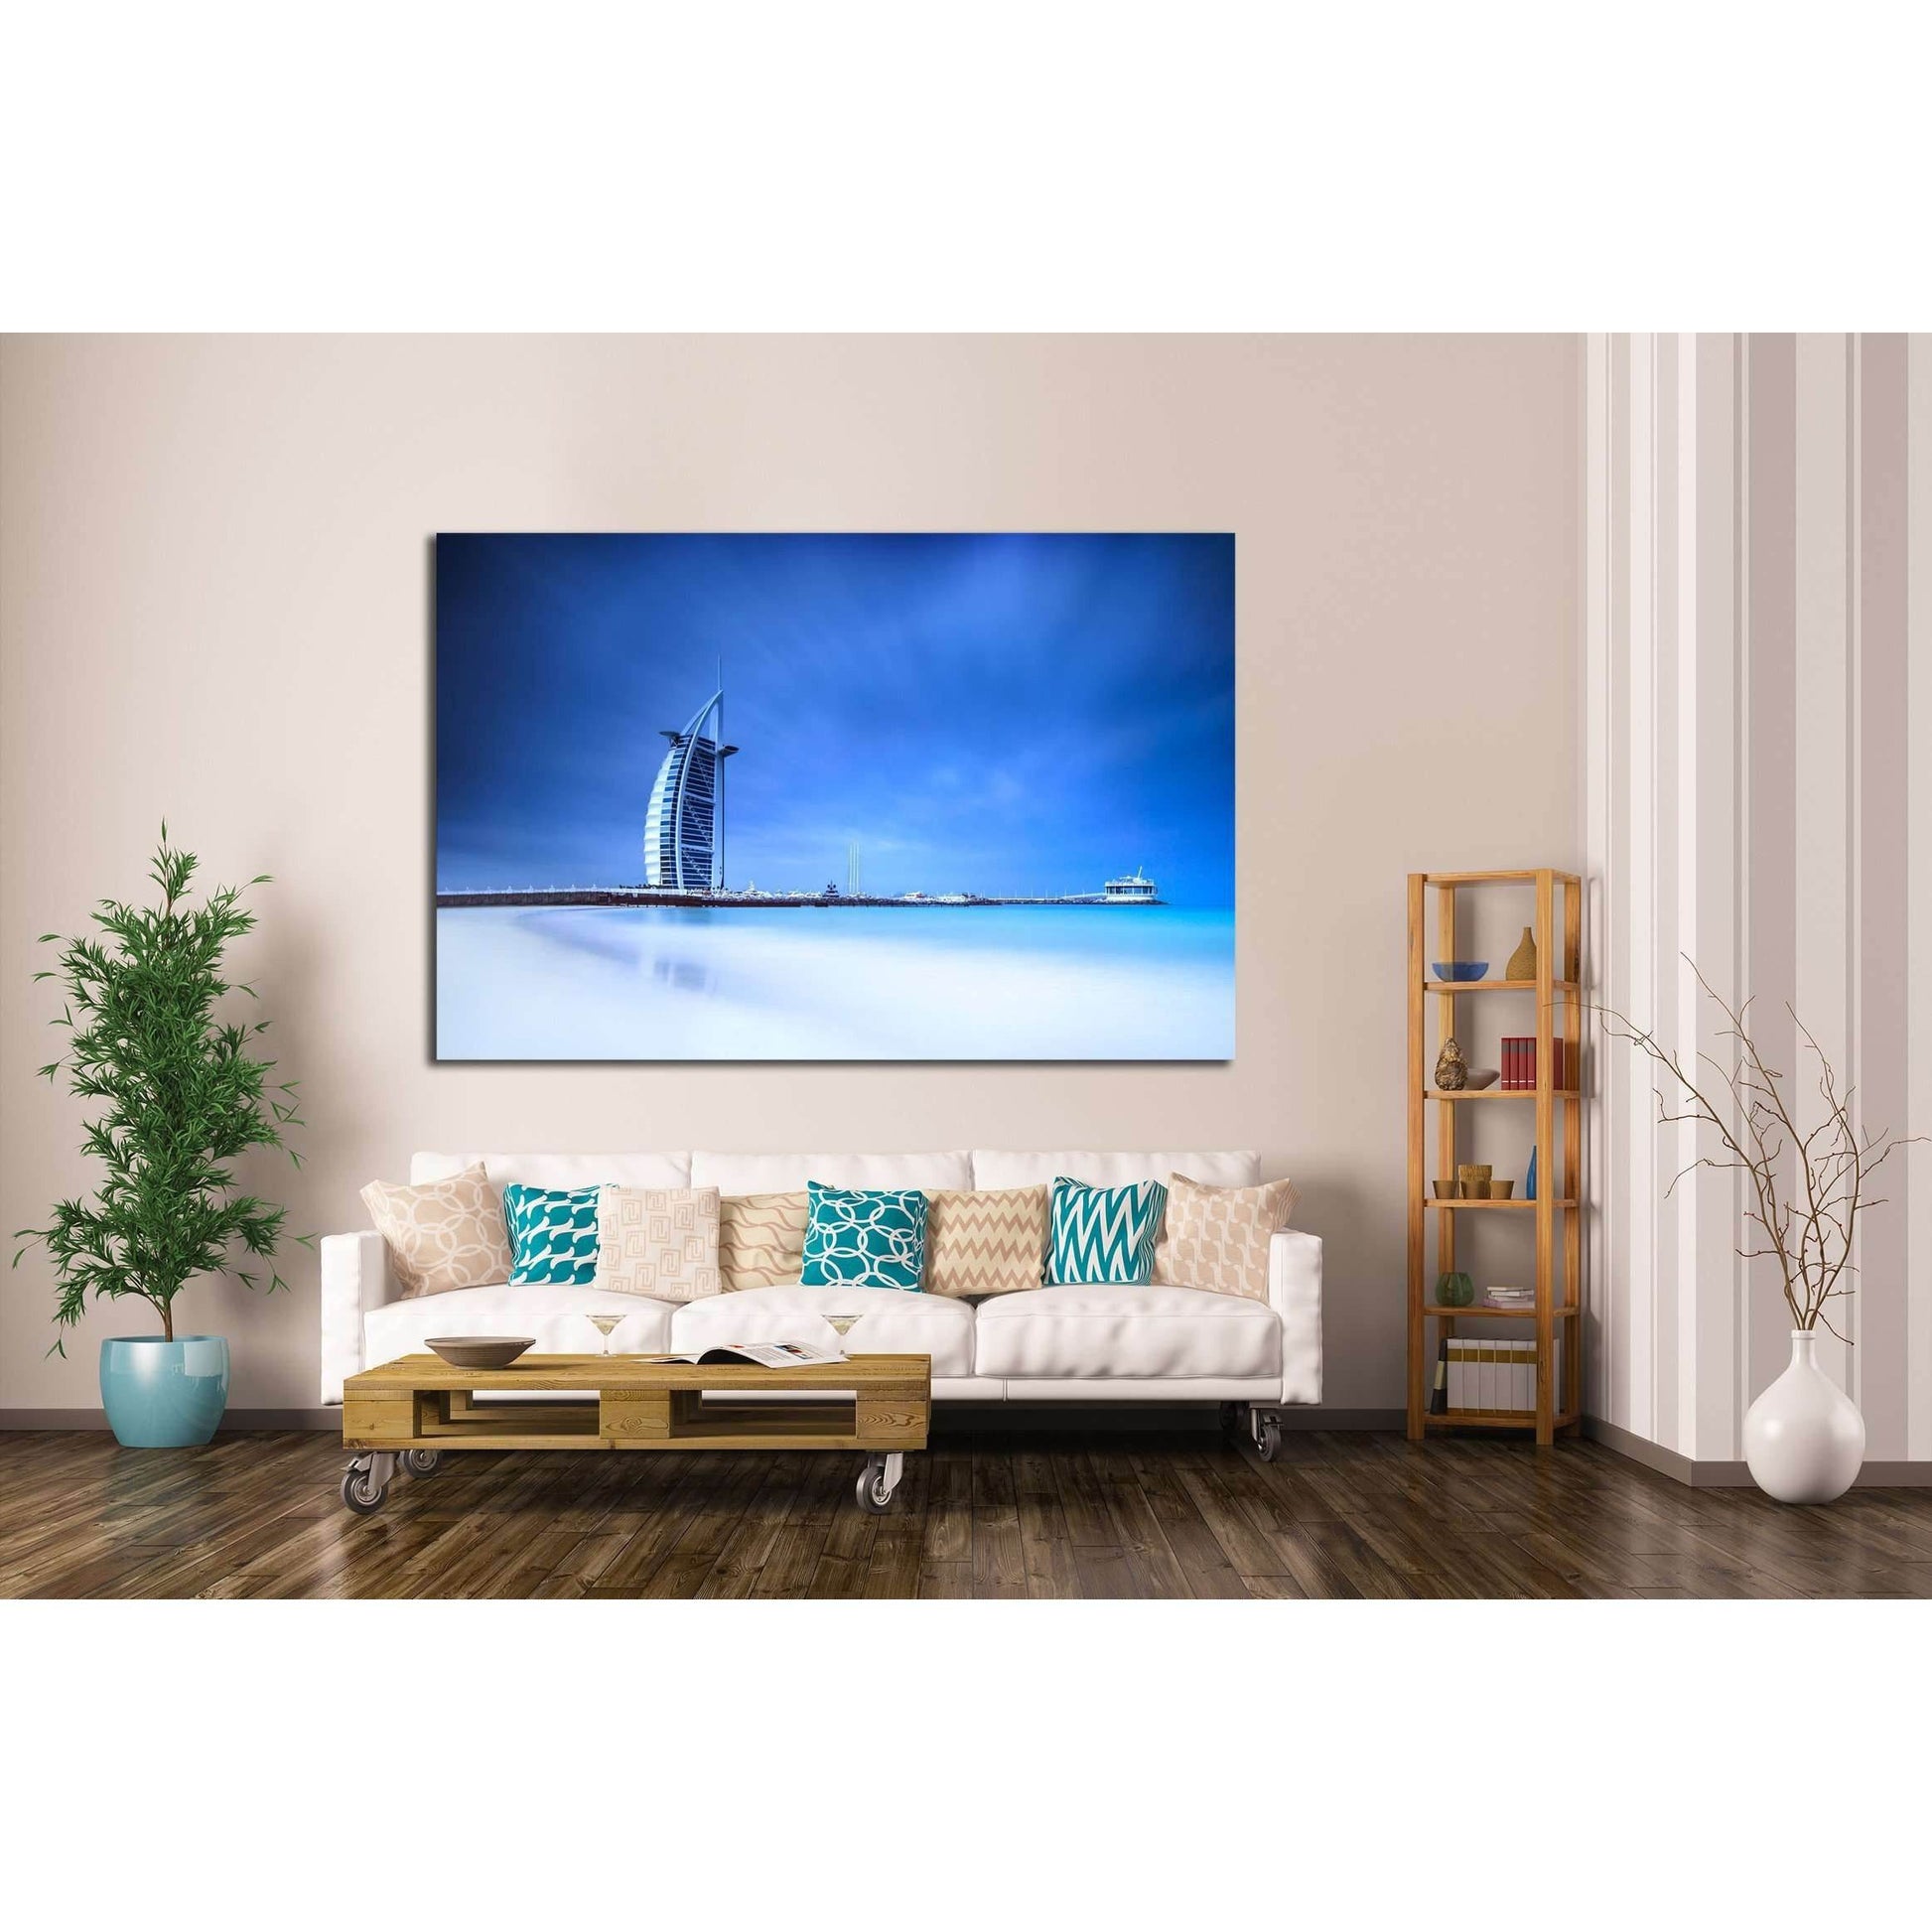 Burj Al Arab hotel on Jumeirah beach in Dubai, modern architecture, luxury beach resort, summer vacation and tourism concept №2268 Ready to Hang Canvas PrintCanvas art arrives ready to hang, with hanging accessories included and no additional framing requ